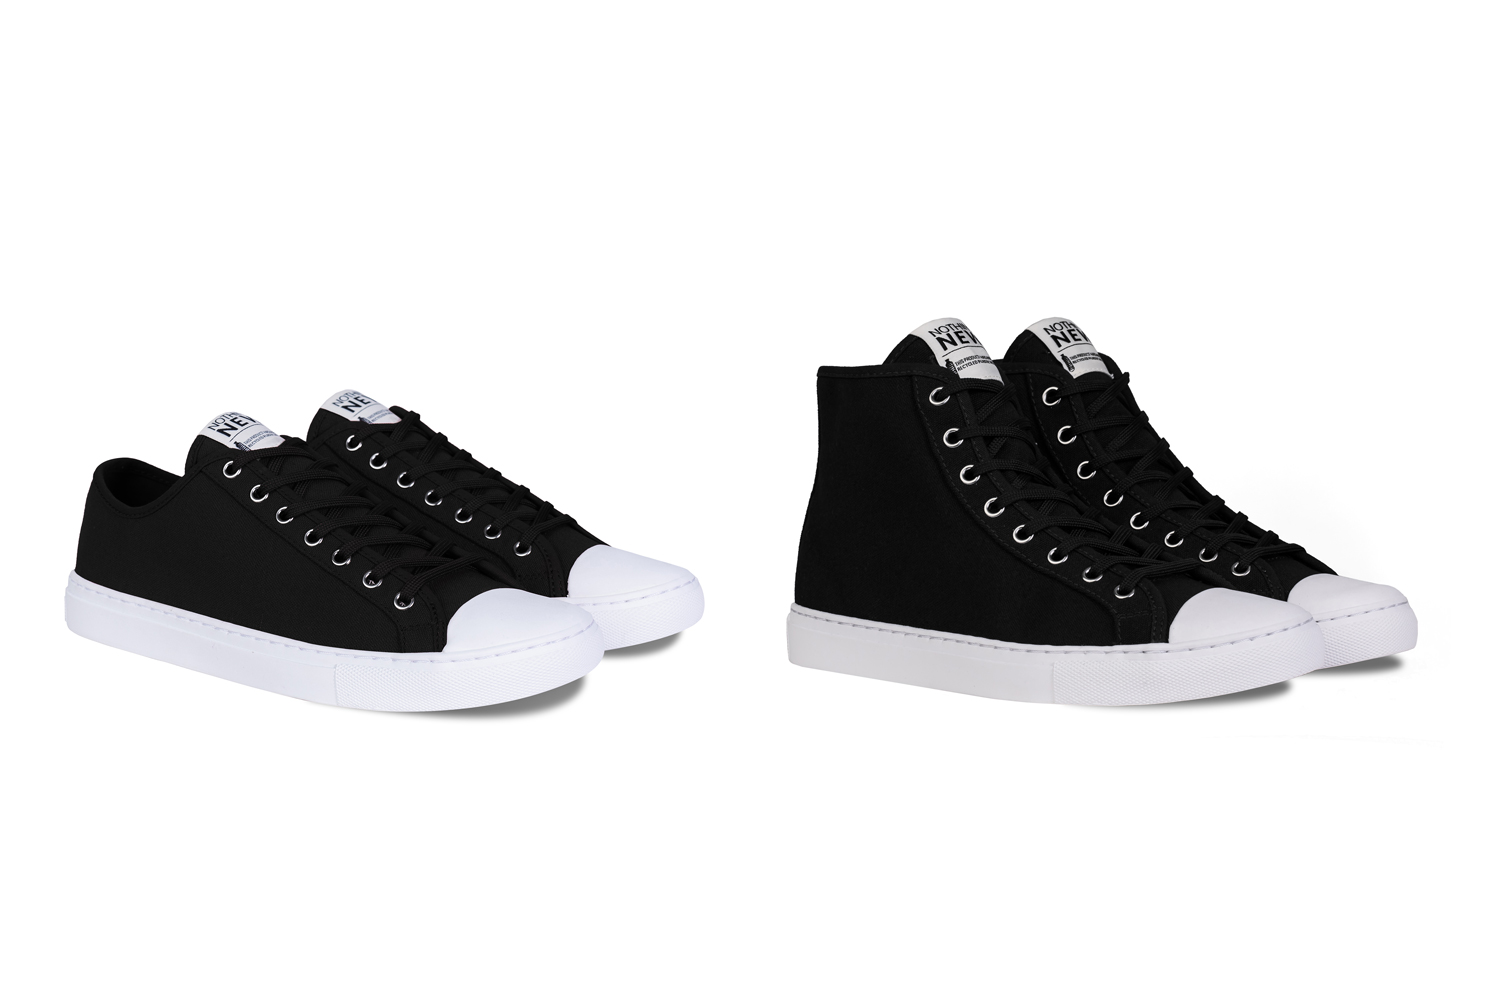 nothing new sustainable sneakers shoes black lowhigh top